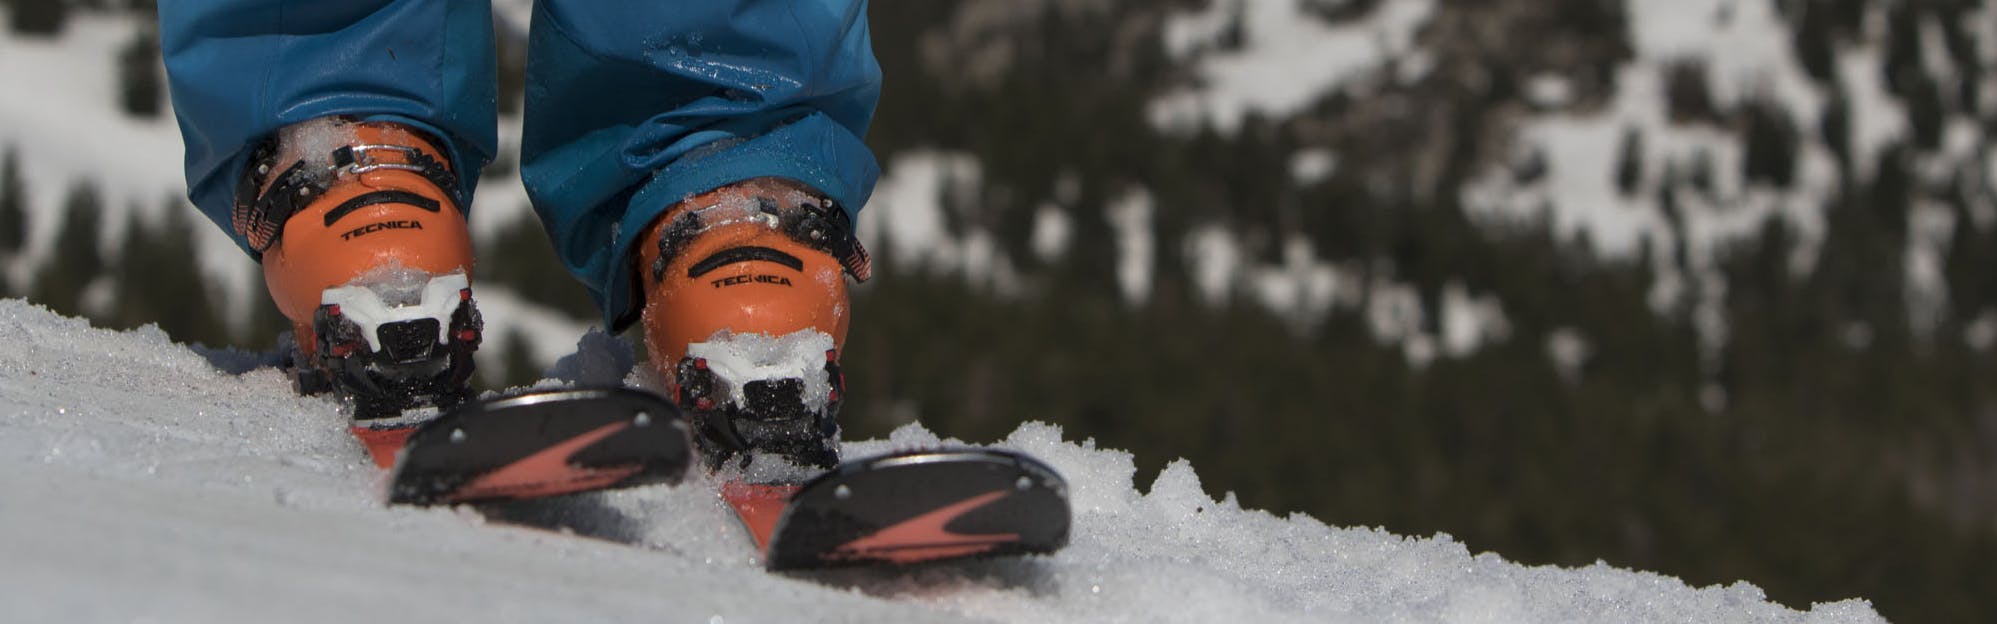 Close up photo of orange boots and orange and black skis on a ski slope. A mountain is visible in the background.